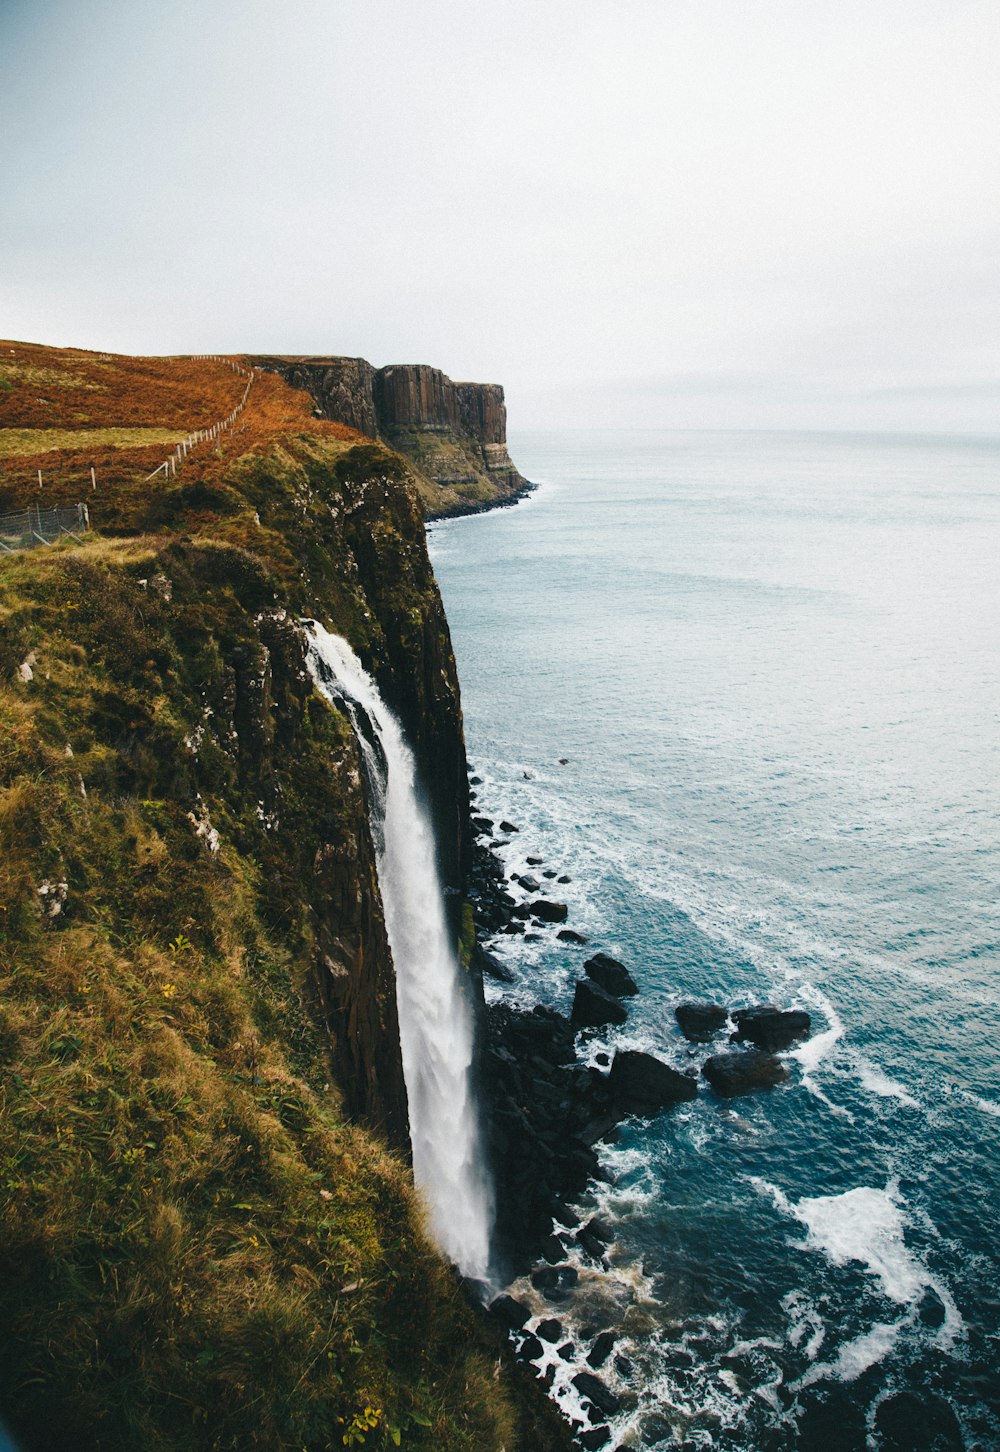 waterfalls in the cliff leading towards the ocean at daytime